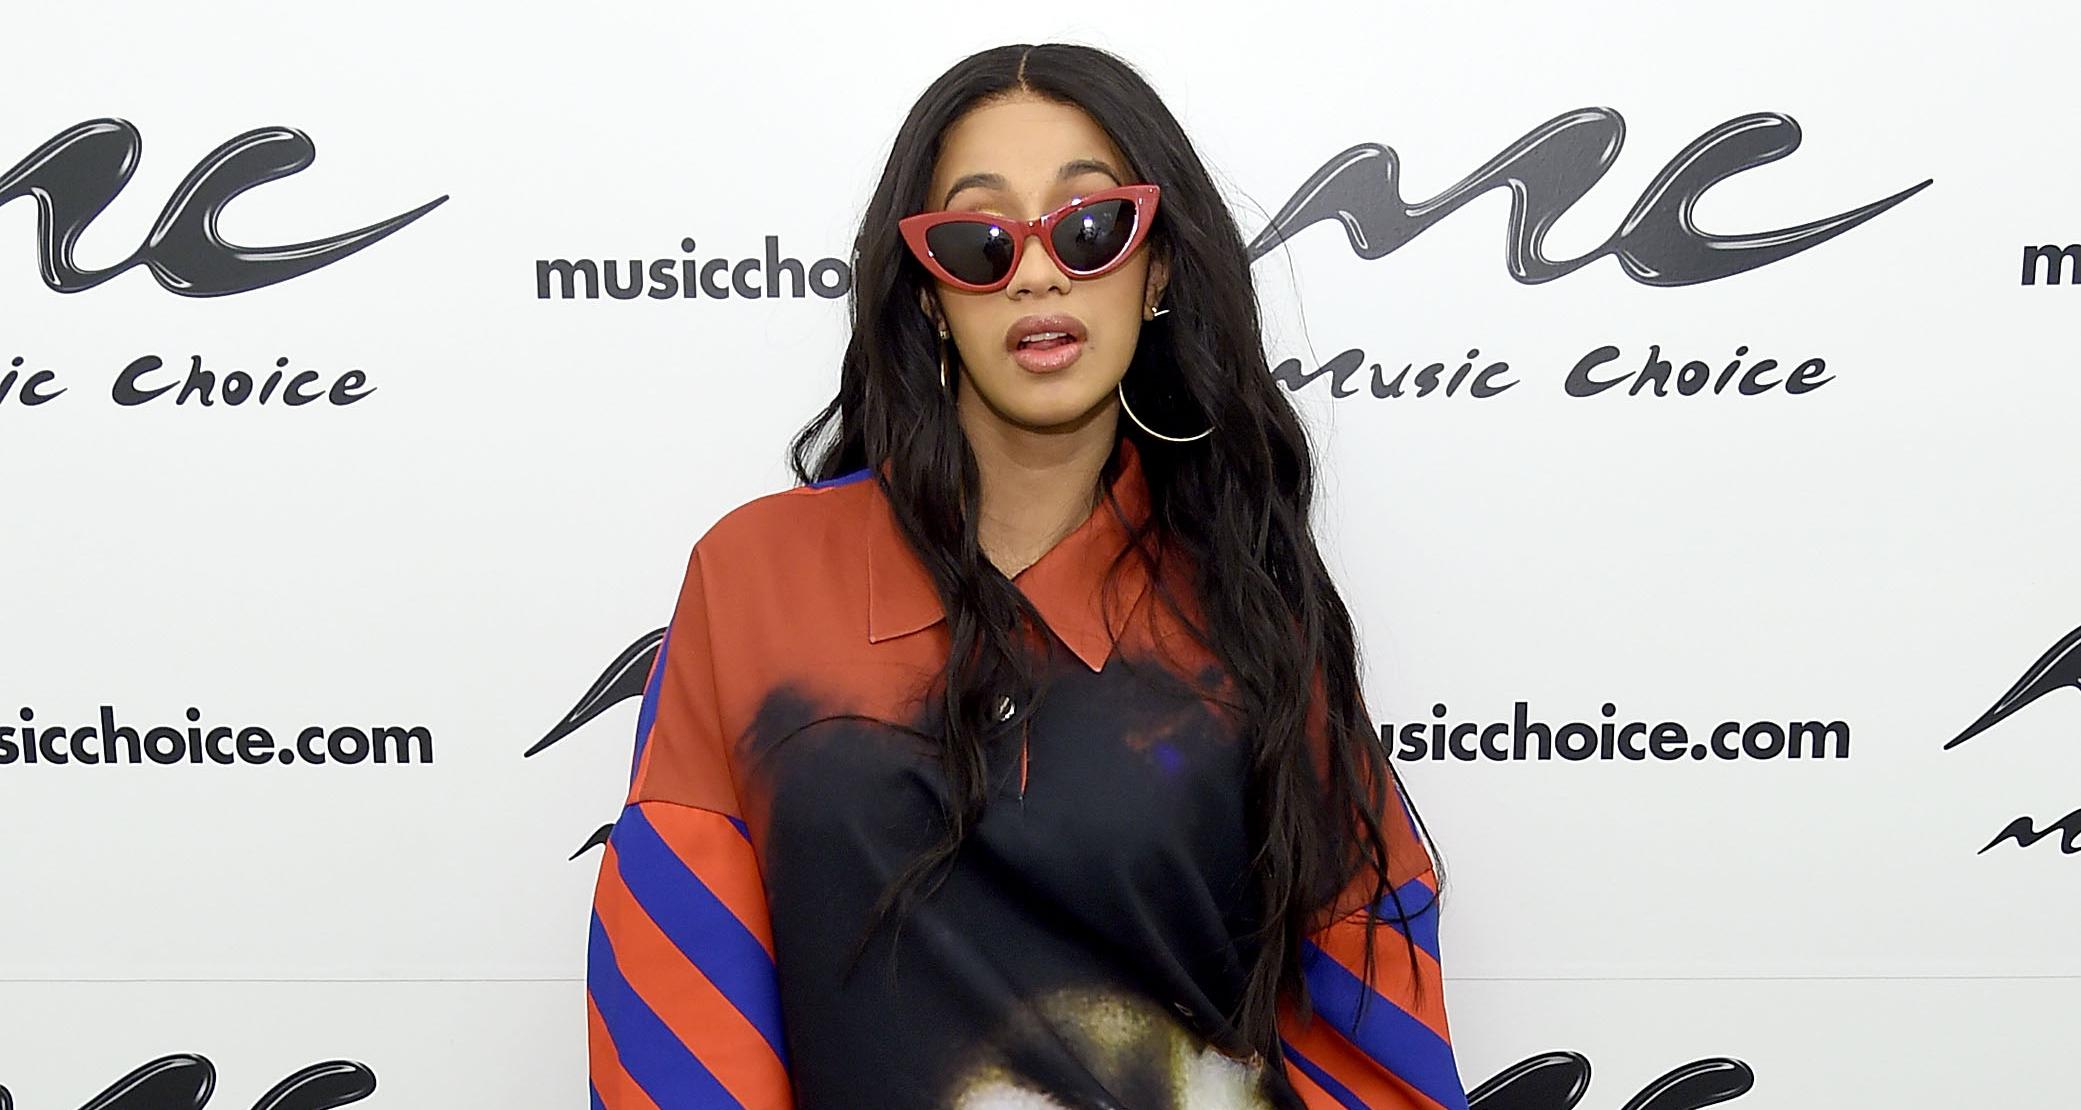 Cardi B’s Net Worth in 2018 Is Estimated at $4.0 Million